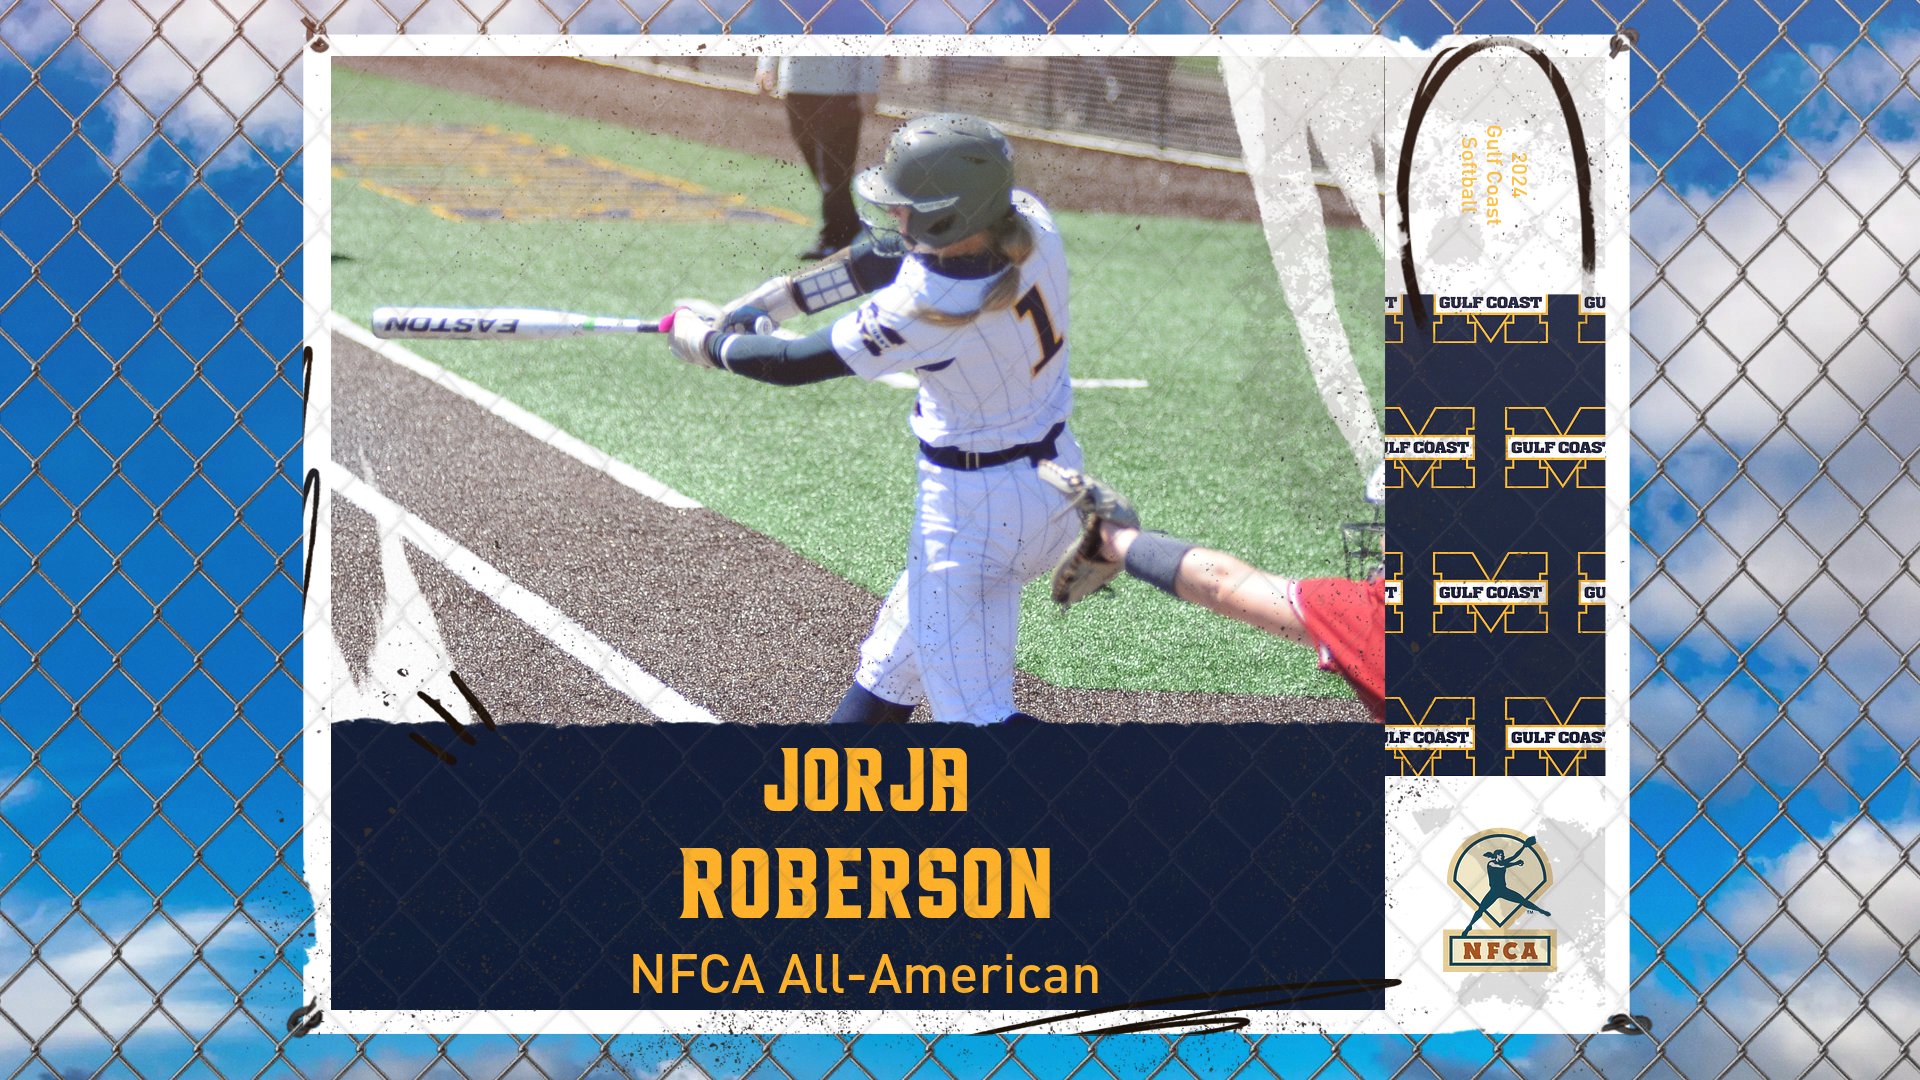 Roberson named NFCA All-American